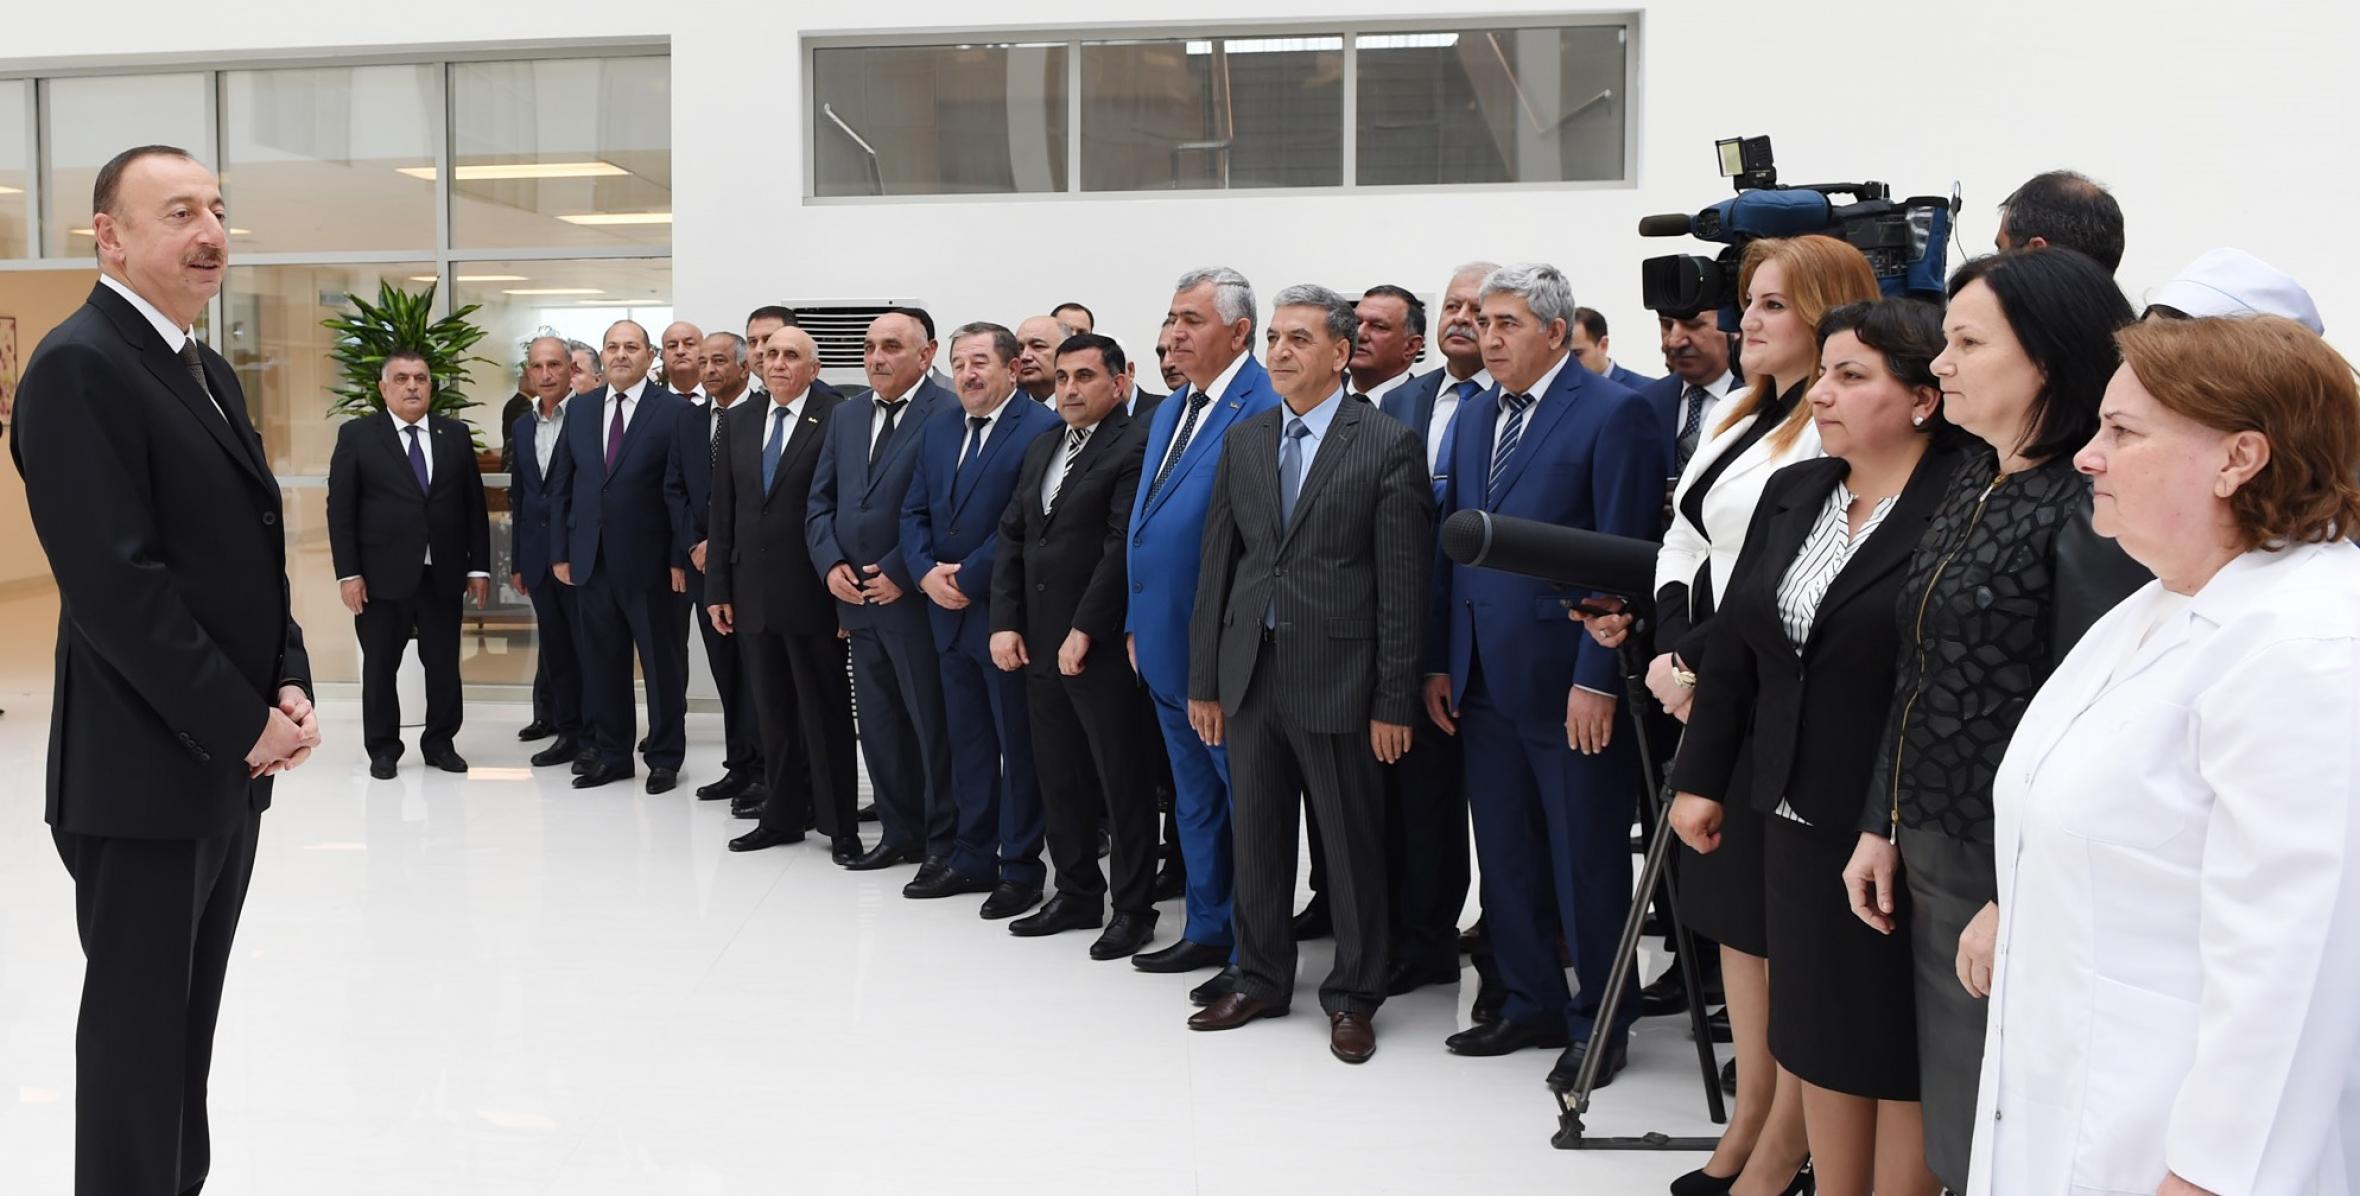 Speech by Ilham Aliyev at the opening of a new building of Aghsu District Central Hospital